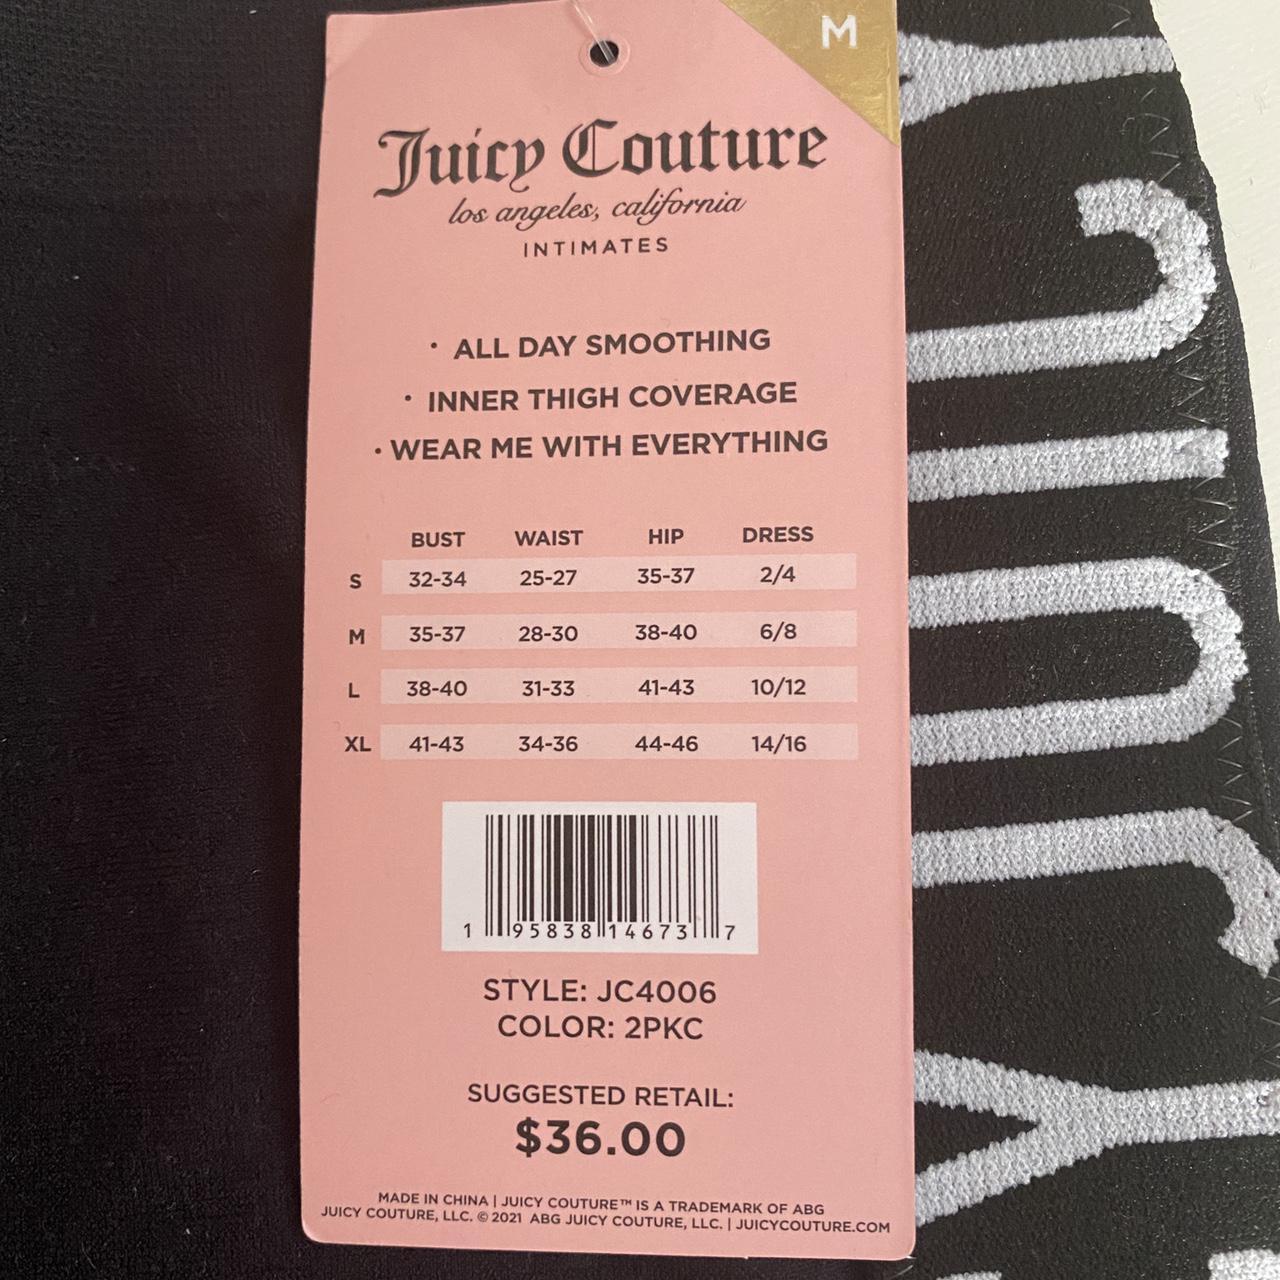 Juicy Couture Intimates Seamless Shaping Shorts, 2 Pack, Medium